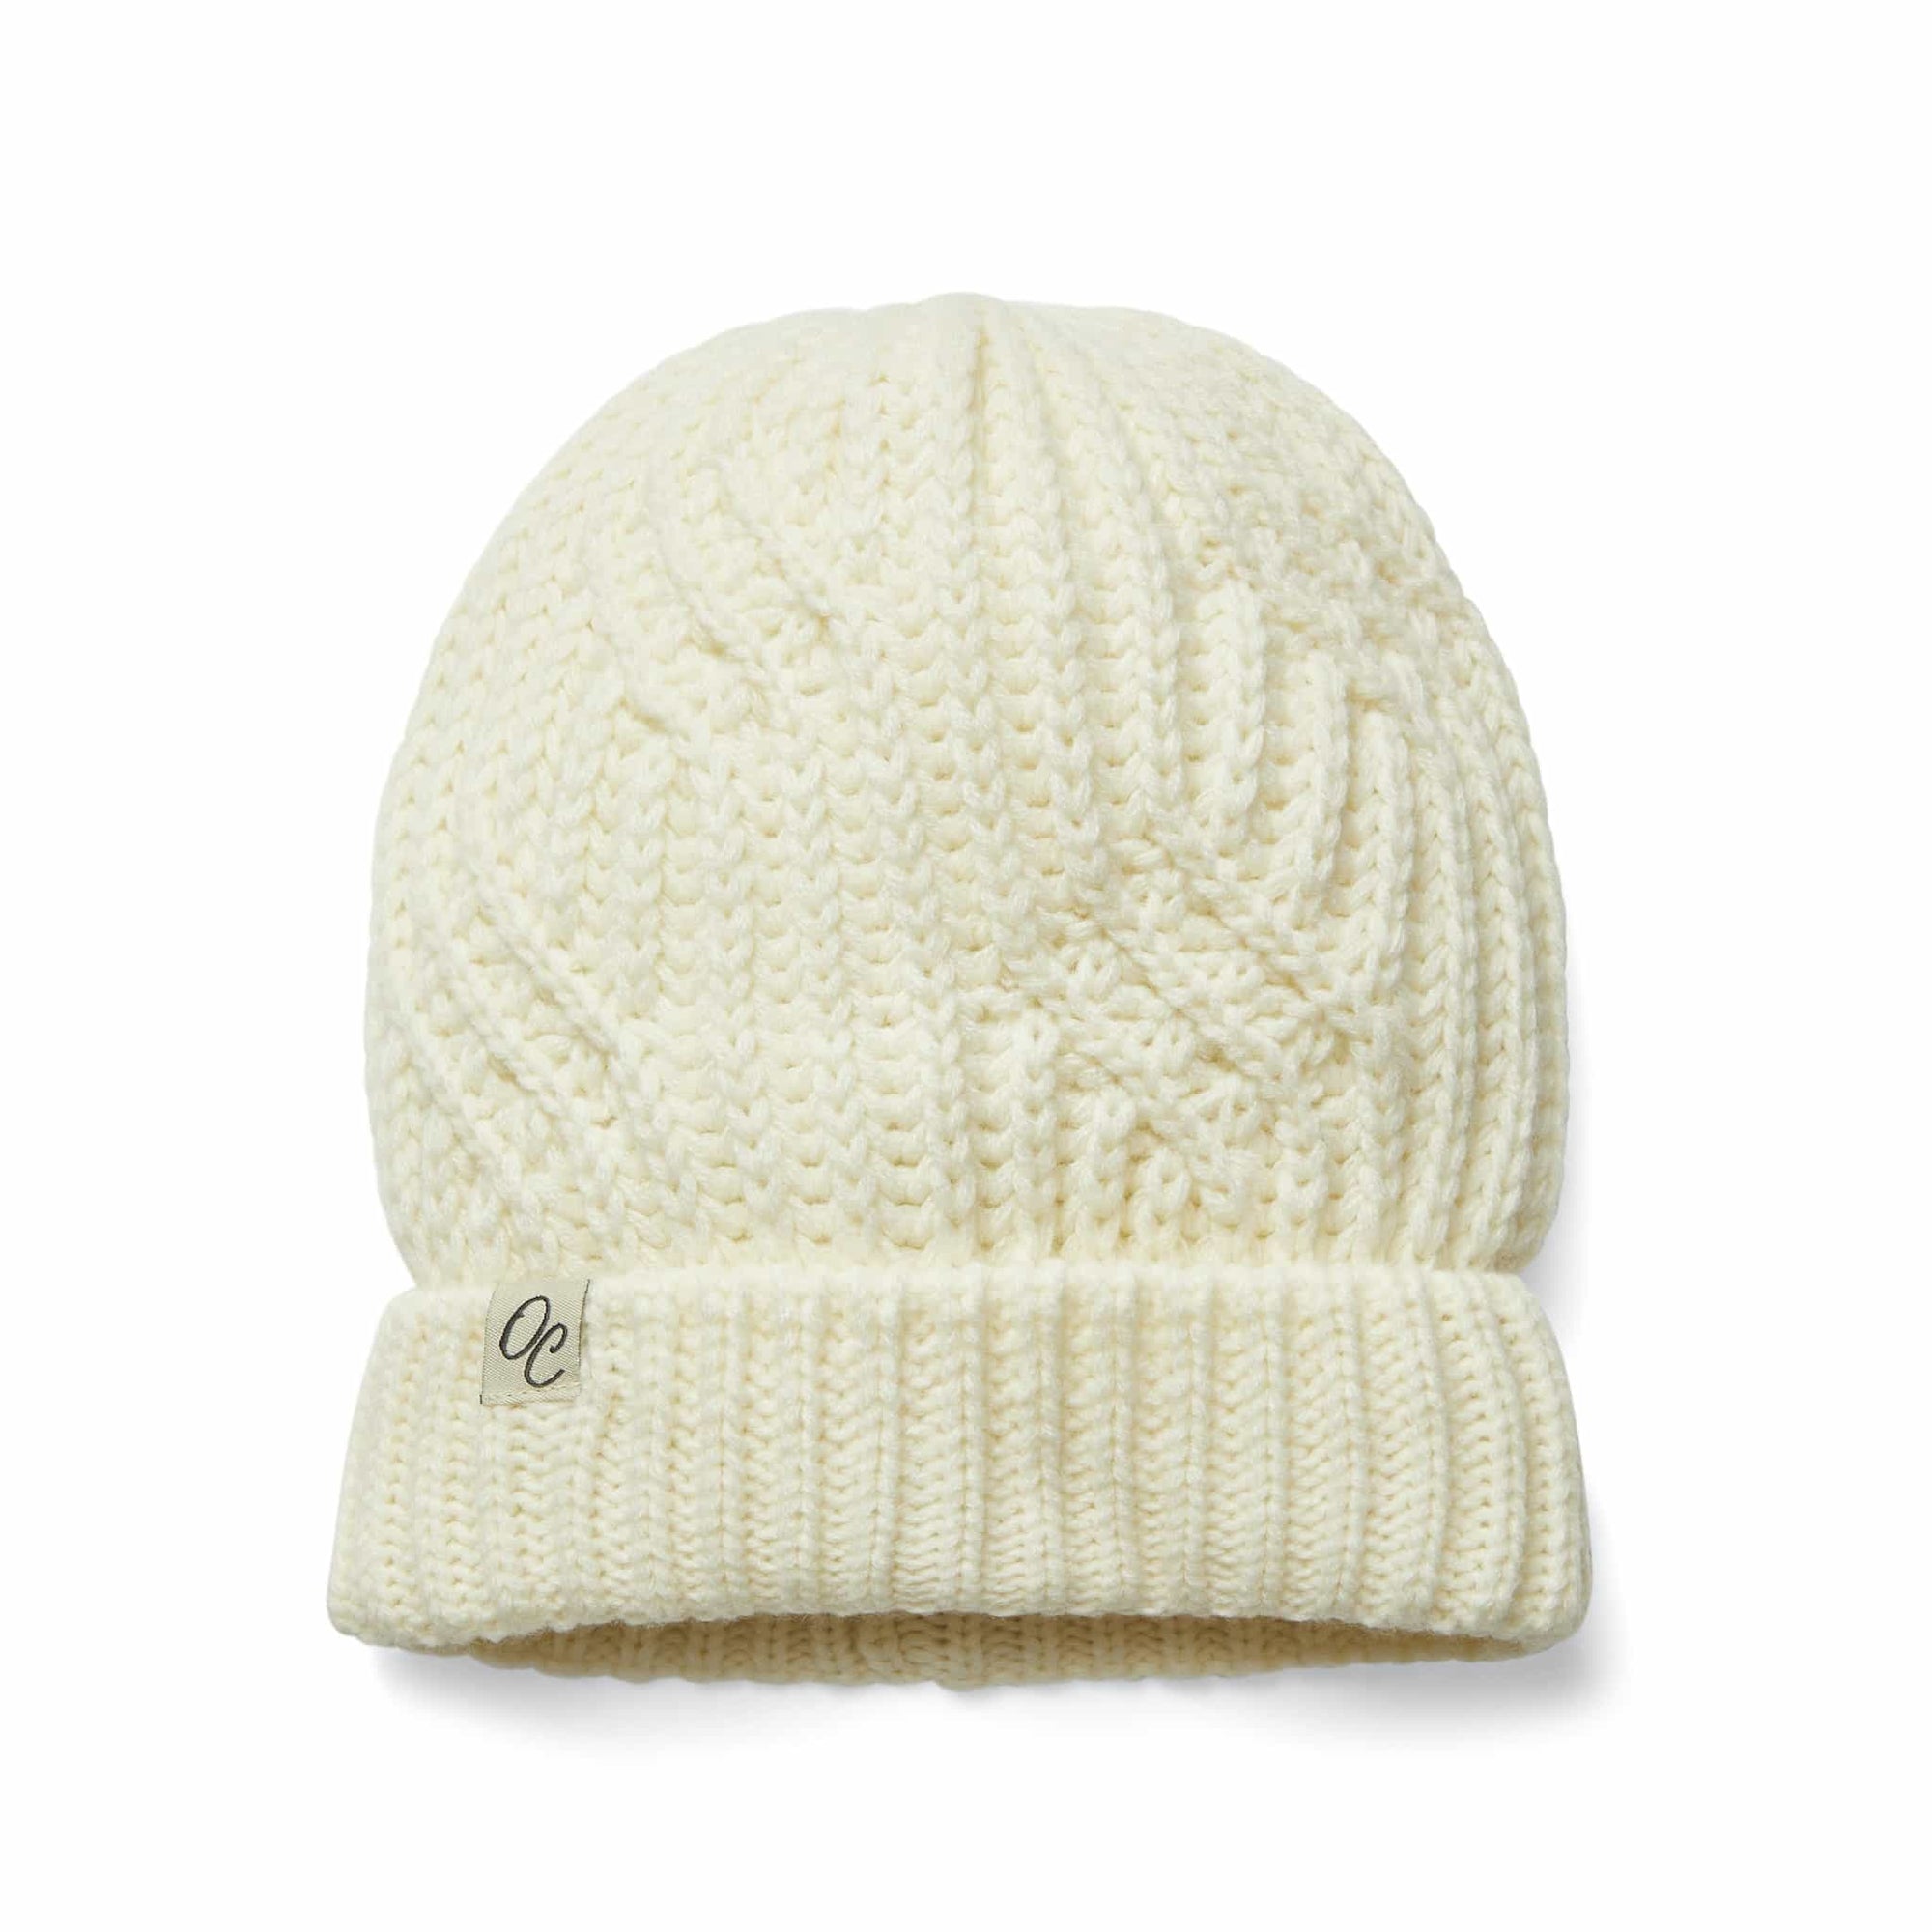 Only Curls Satin Lined Knitted Beanie Hat - Cream - Only Curls